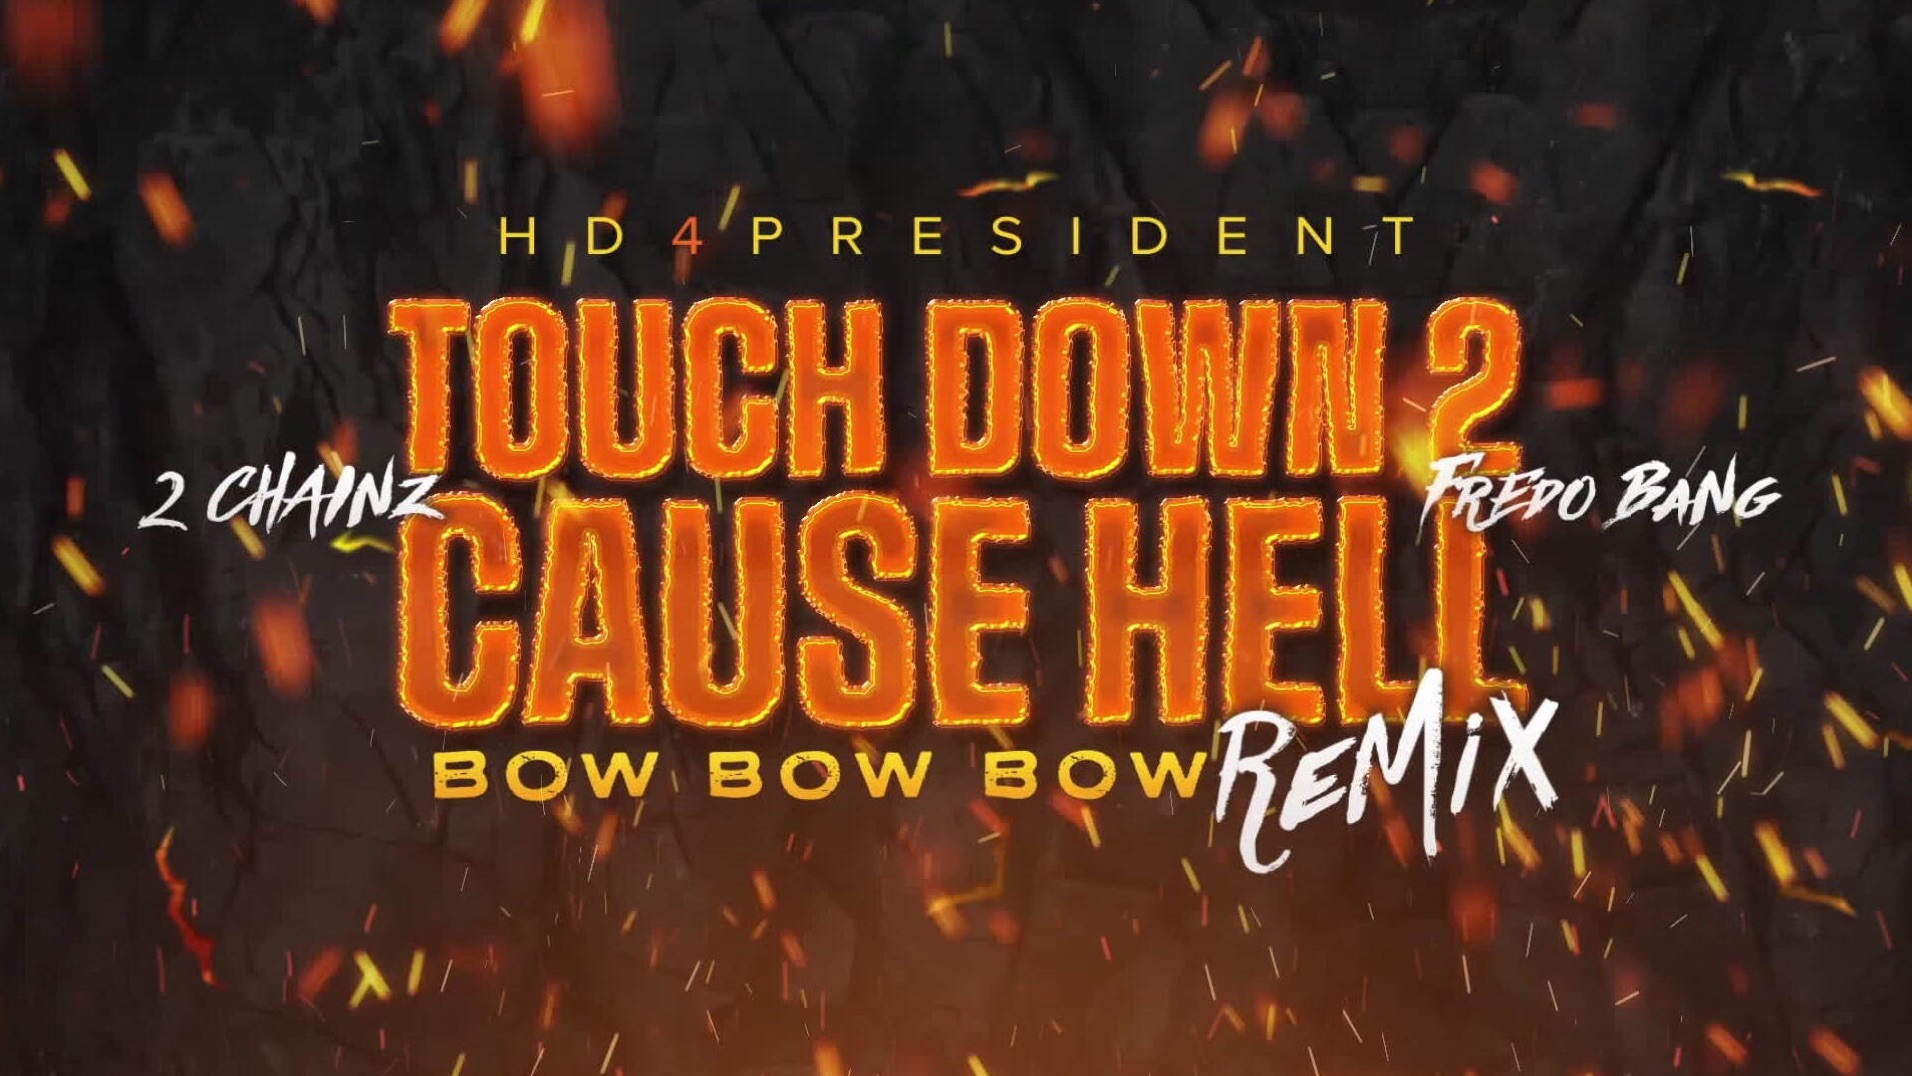 Play Touch Down 2 Cause Hell (Bow Bow Bow) by HD4President on  Music